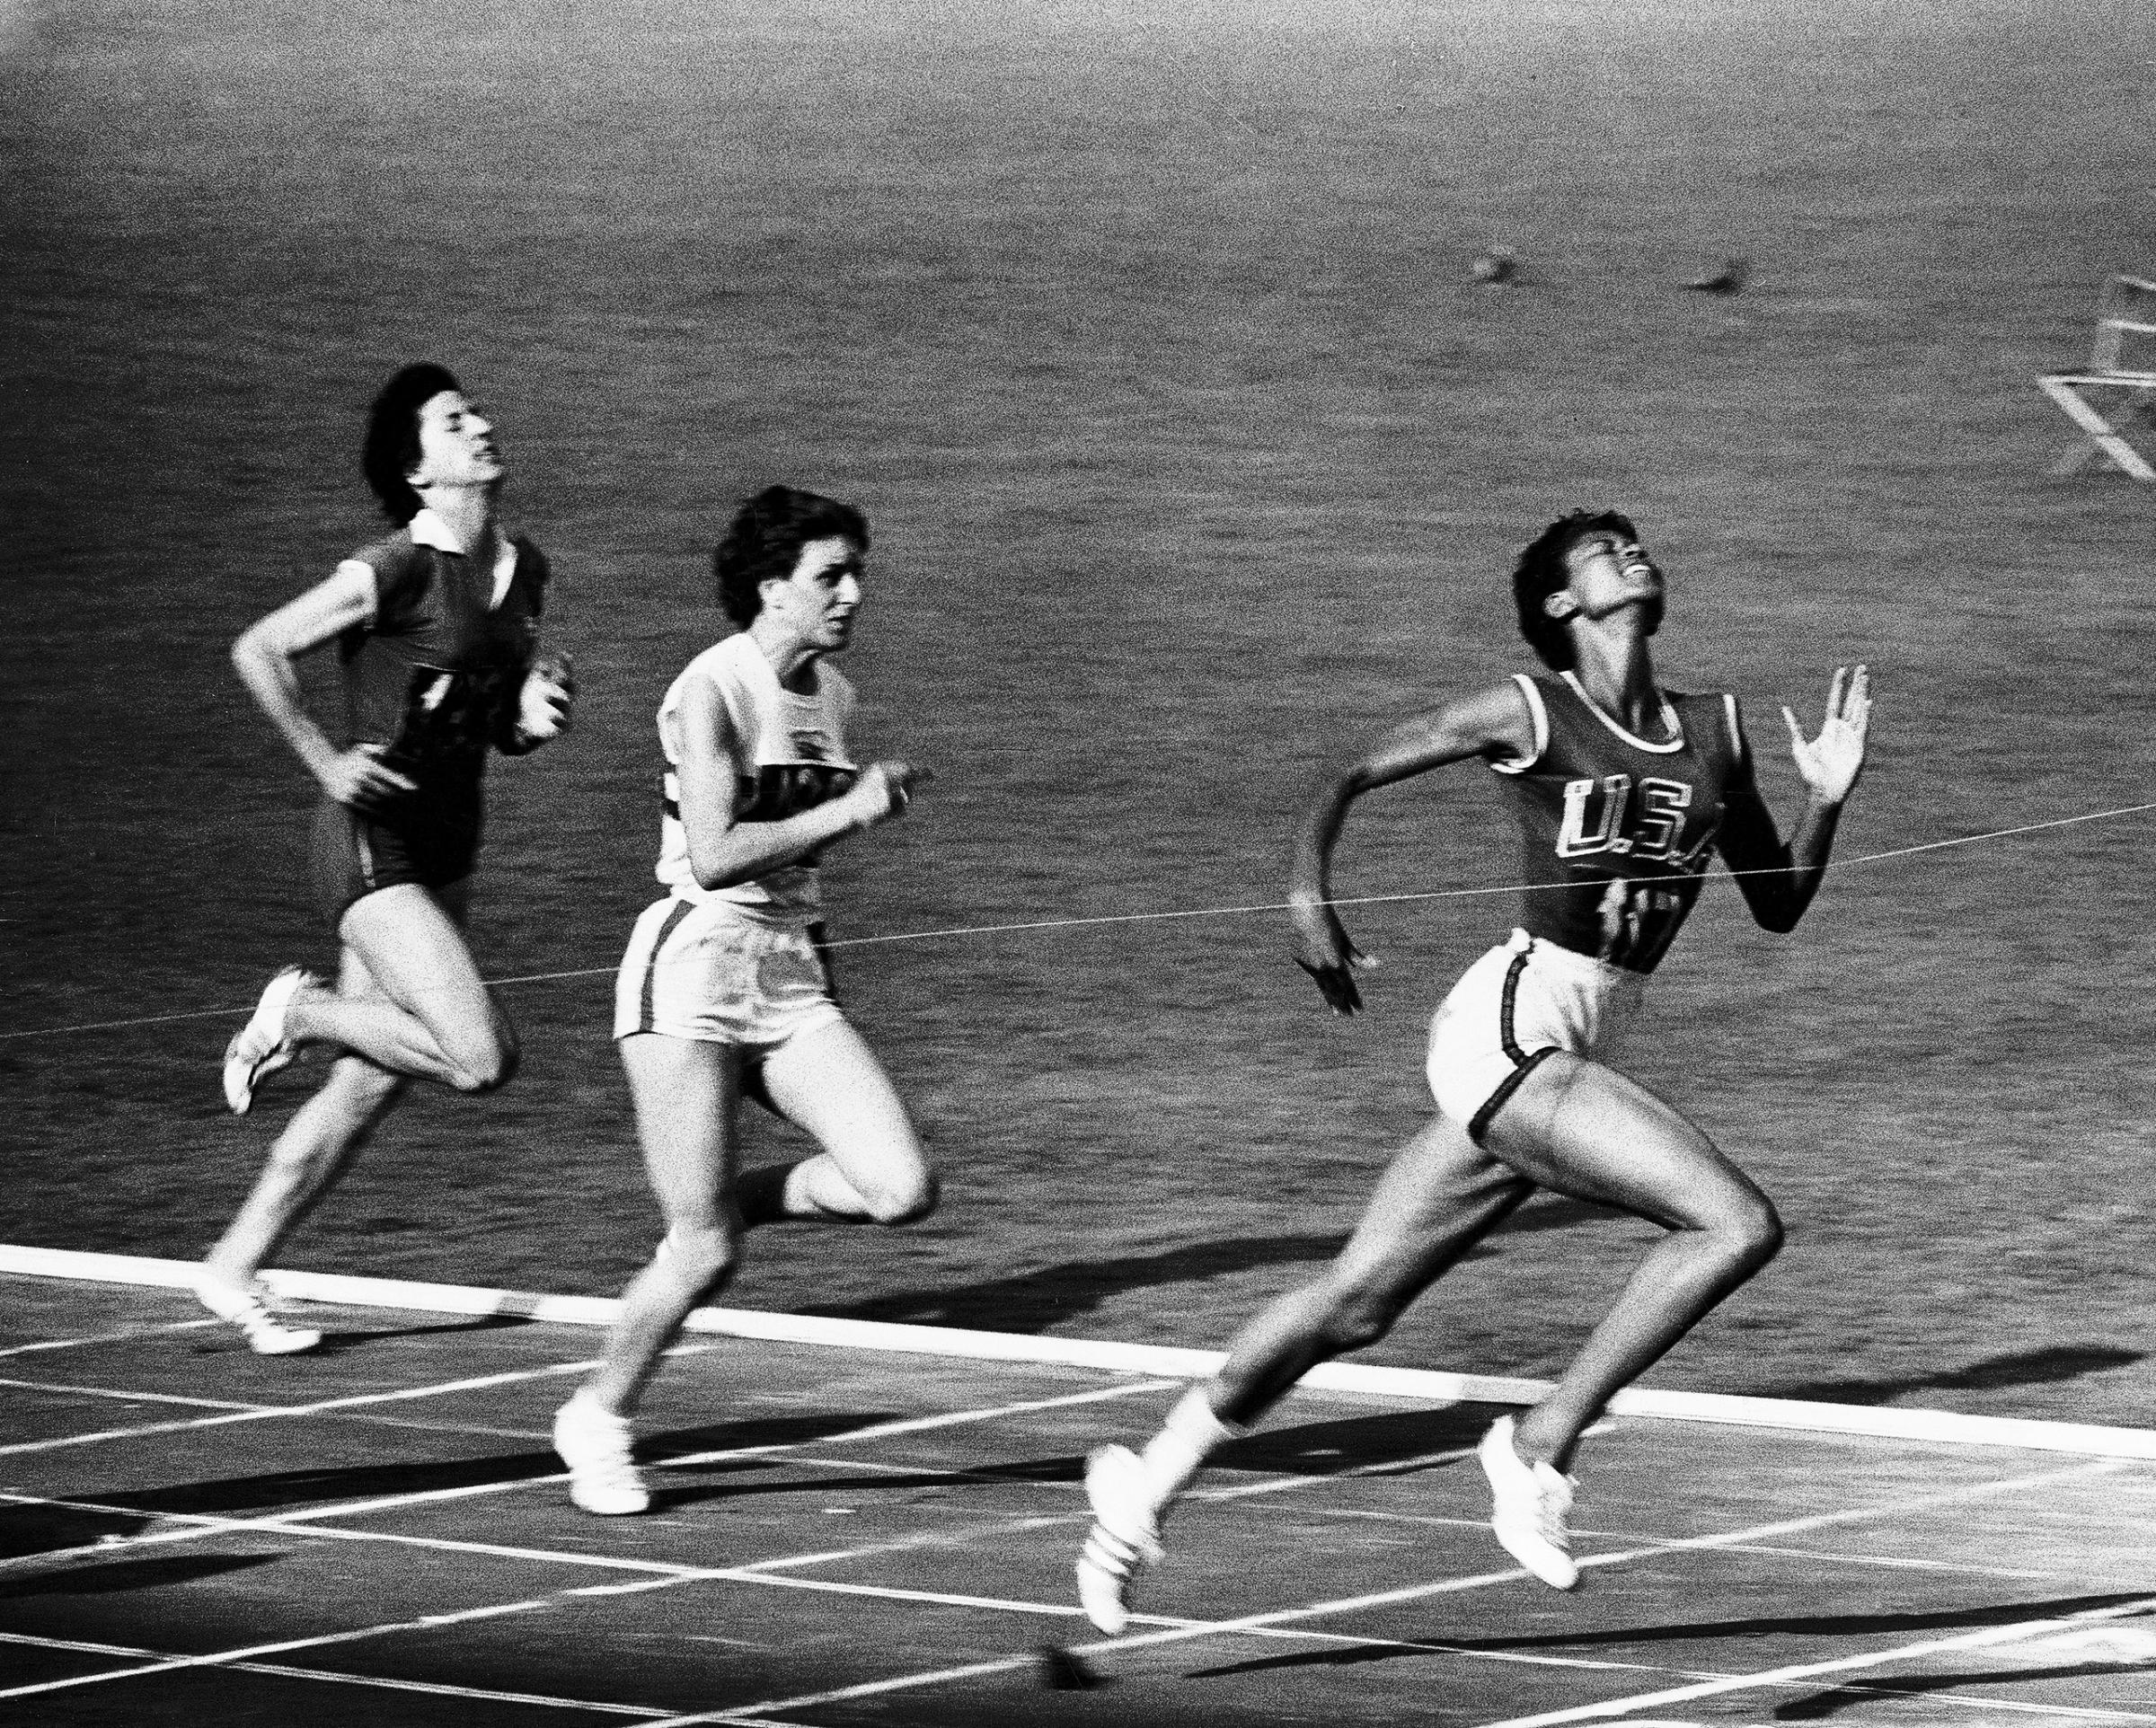 US Runner Wilma Rudolph winning women's 100-meter race at the 1960 summer Olympics in Rome, Italy.